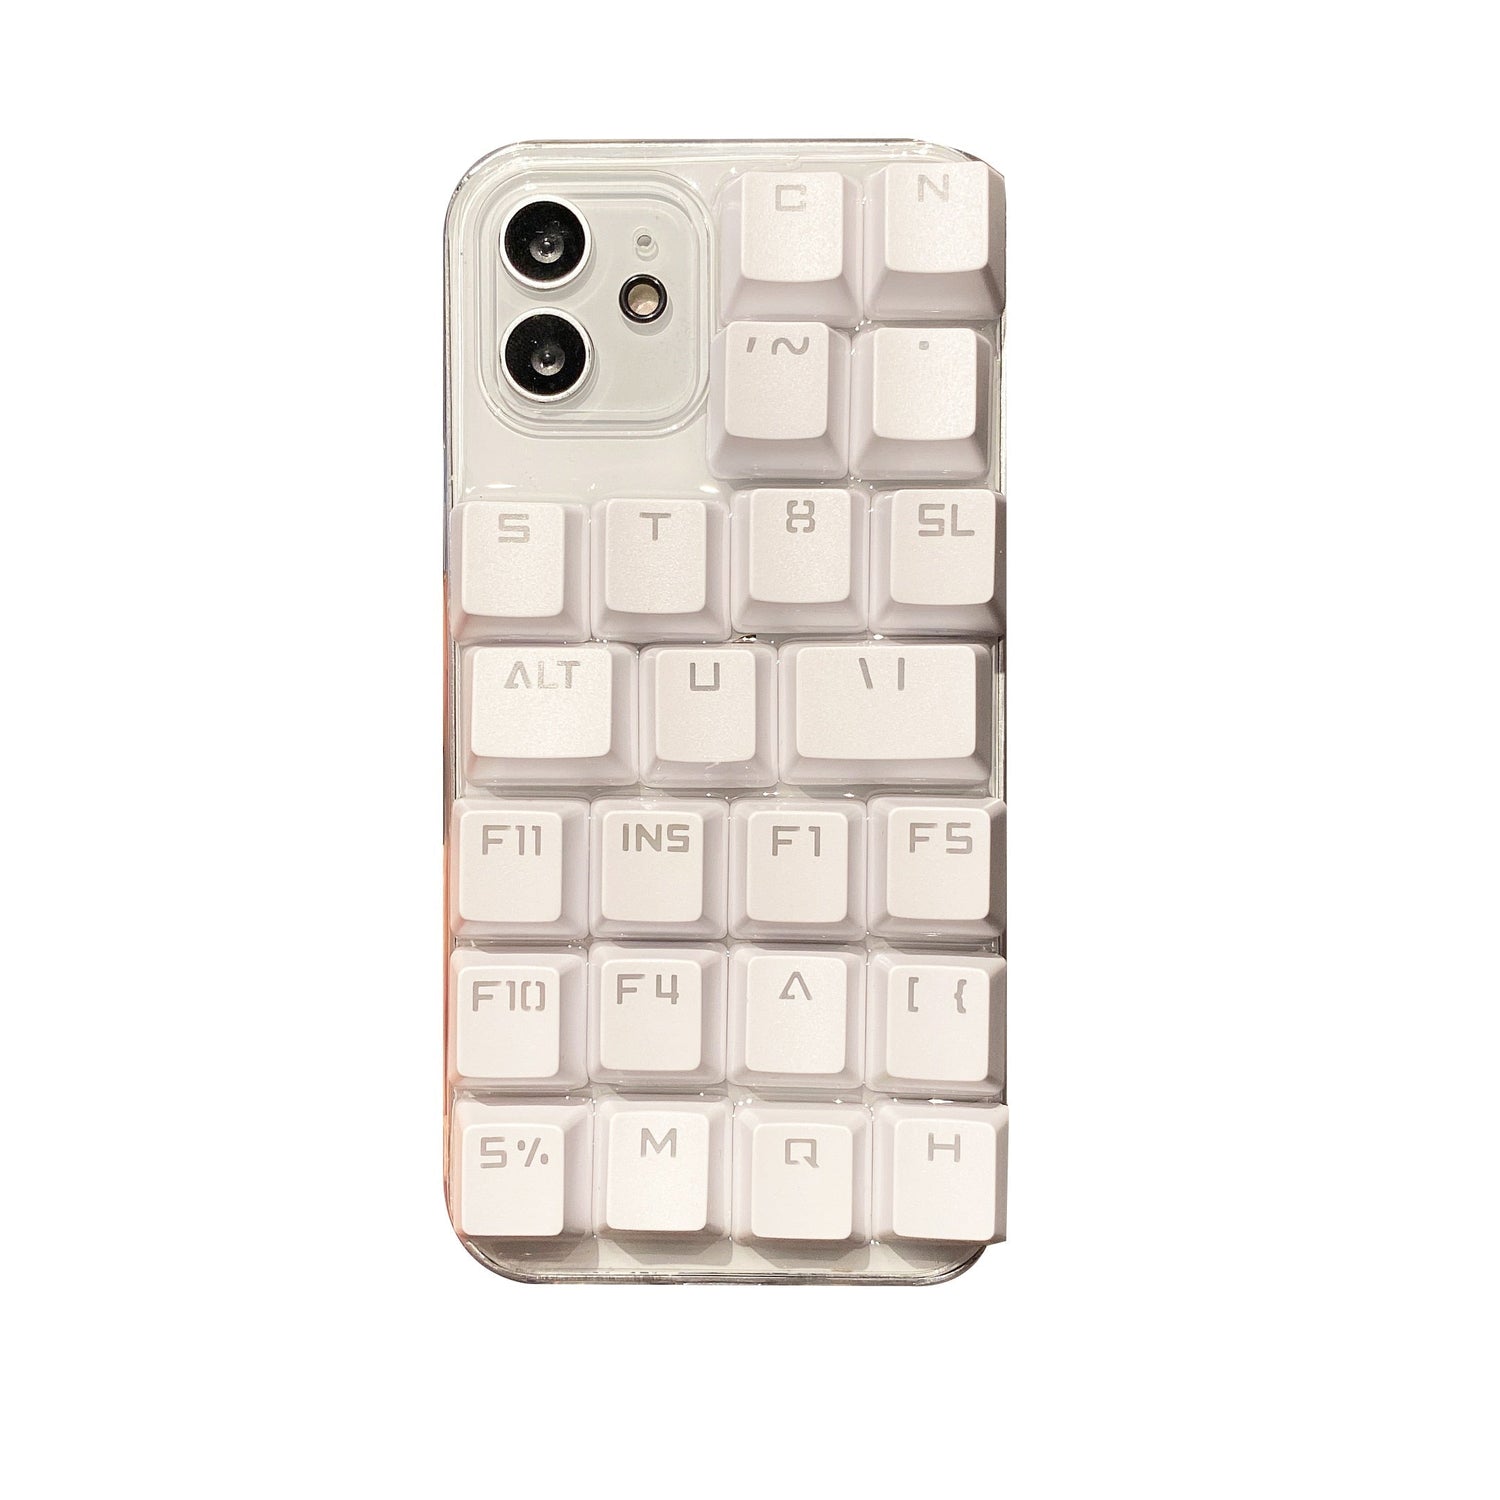 Creative Keyboard Case for iPhone - iPhone Cases